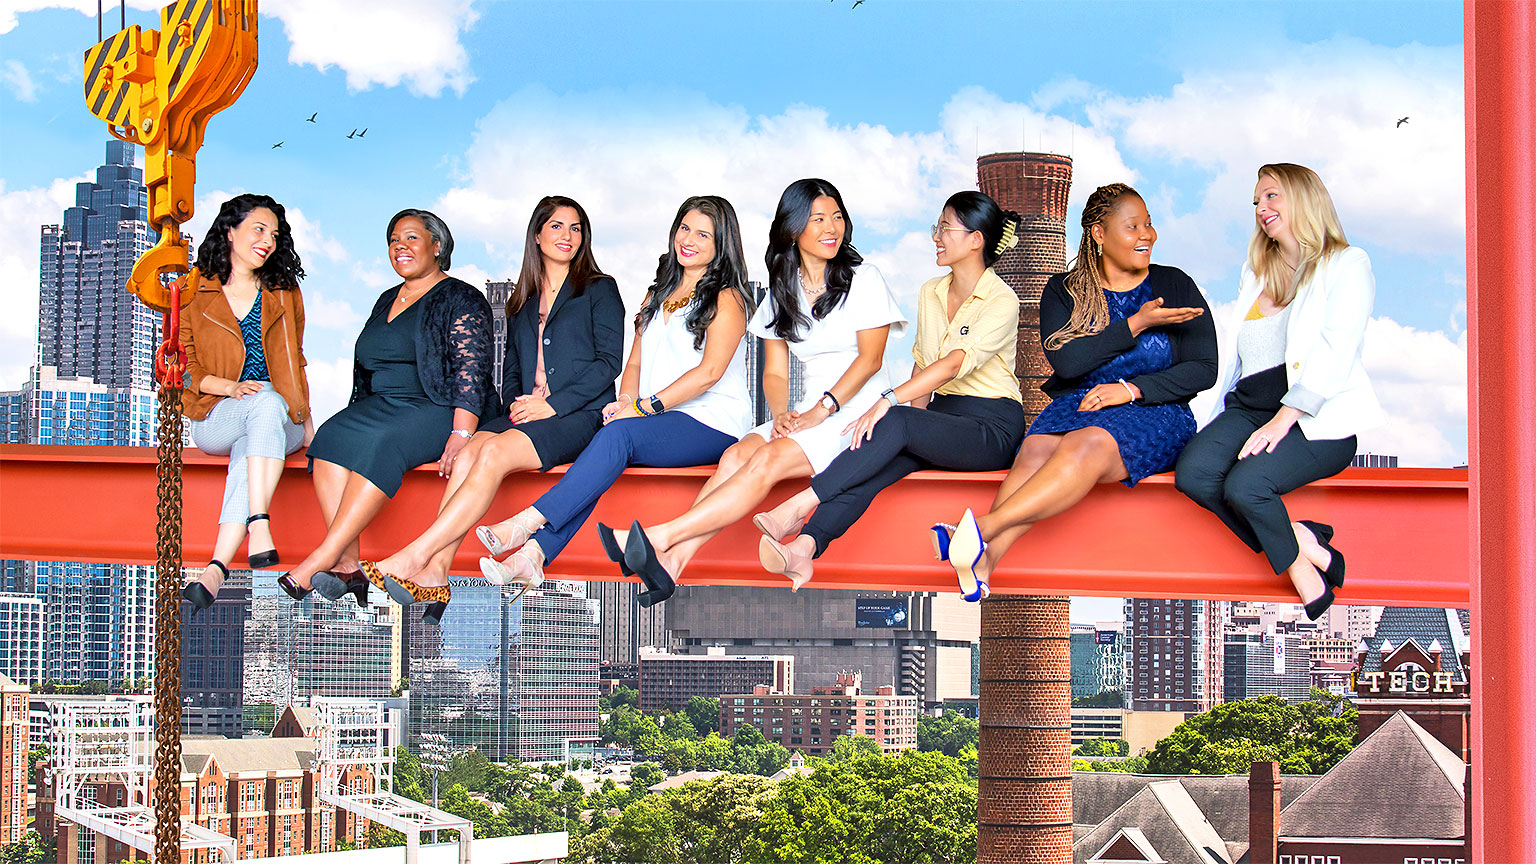 Photoshopped image of women in Building Construction faculty seated on an I-beam, with the Atlanta skyline behind them. The composition harks back to Lunch Atop a Skyscraper (1932).